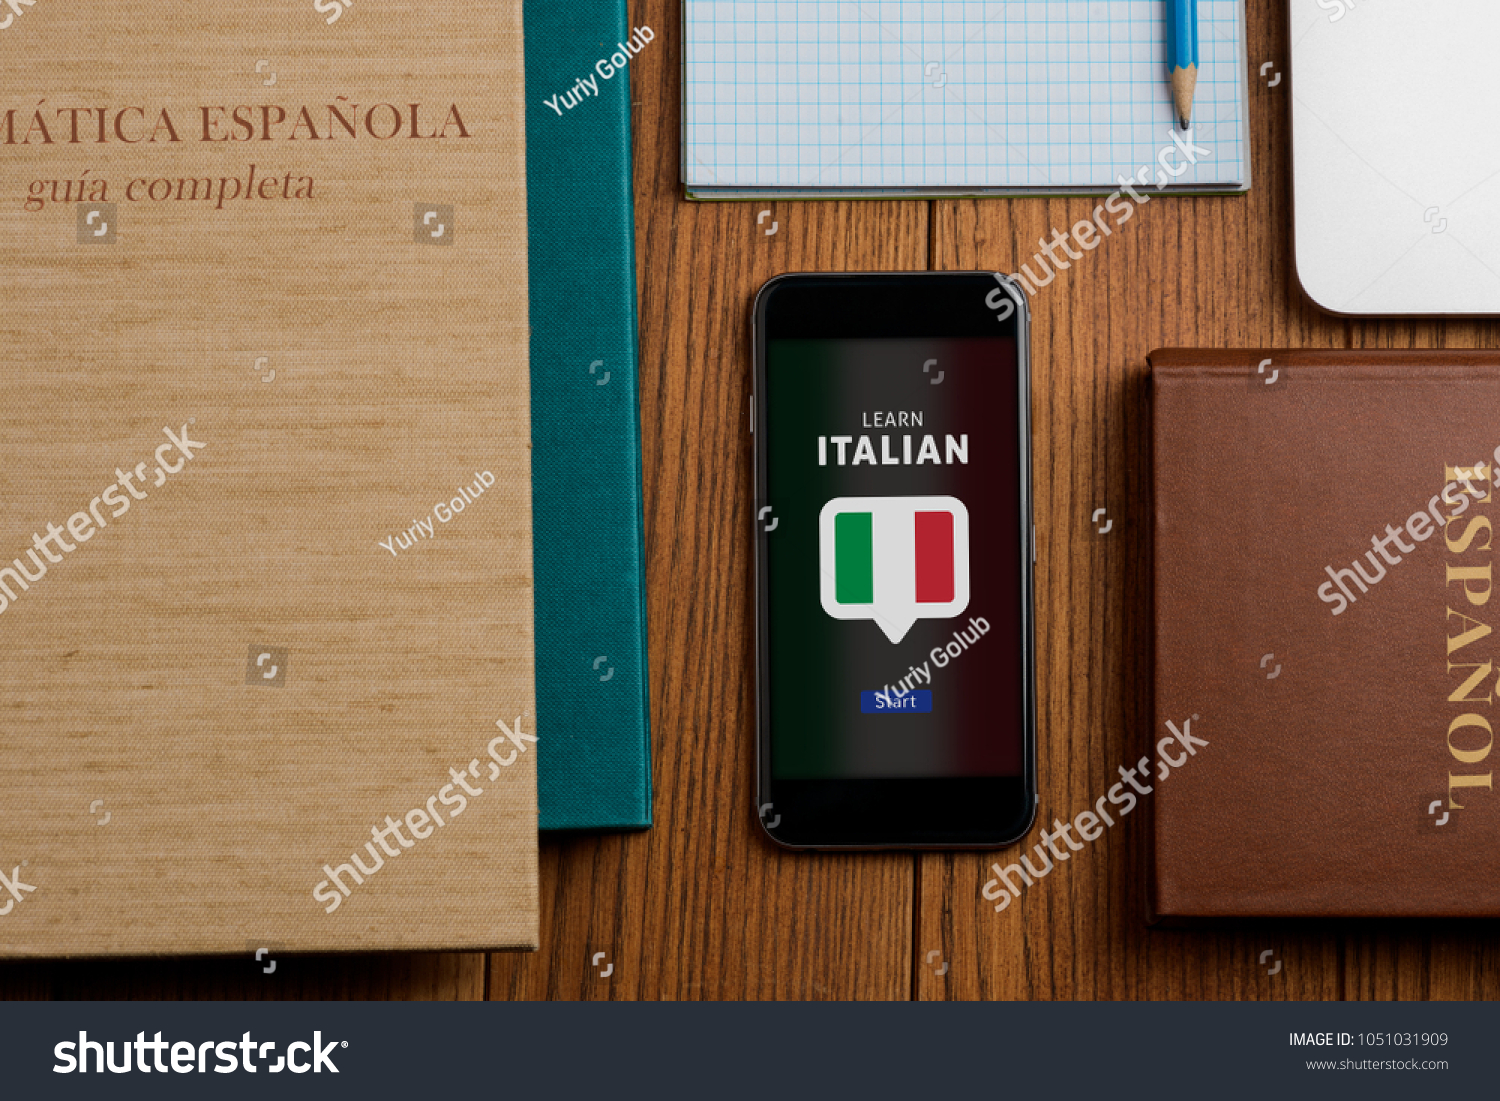 App and textbooks for learning Italian. Books, phone and notepad on student's workplace. Education, foreign languages. #1051031909